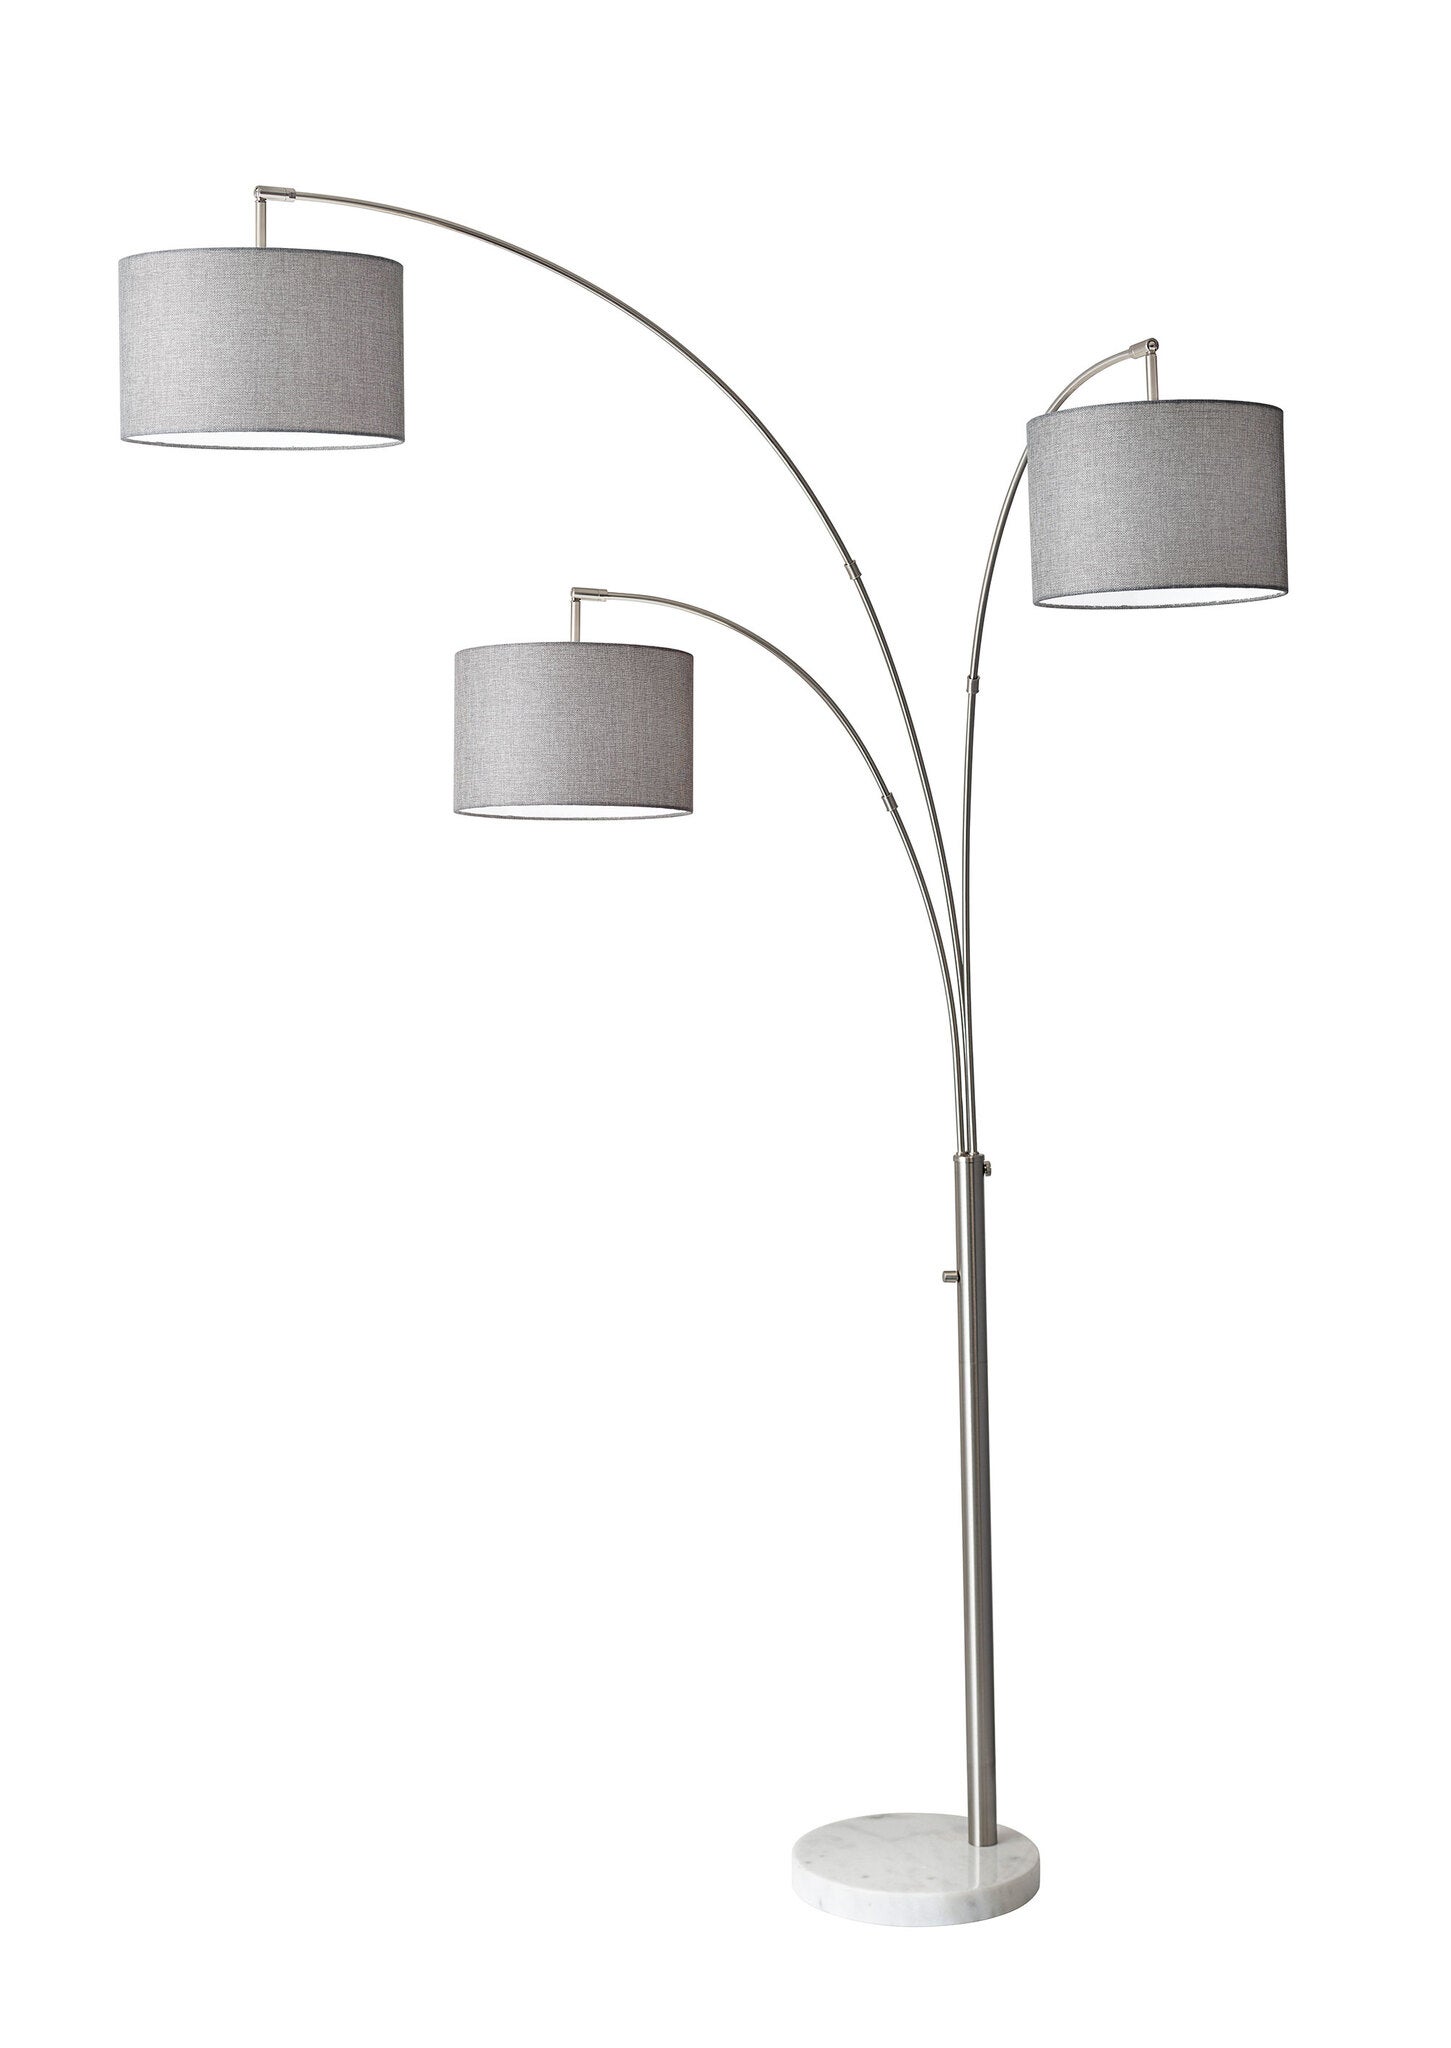 Floor Lamps - Arc Lamps | Adesso